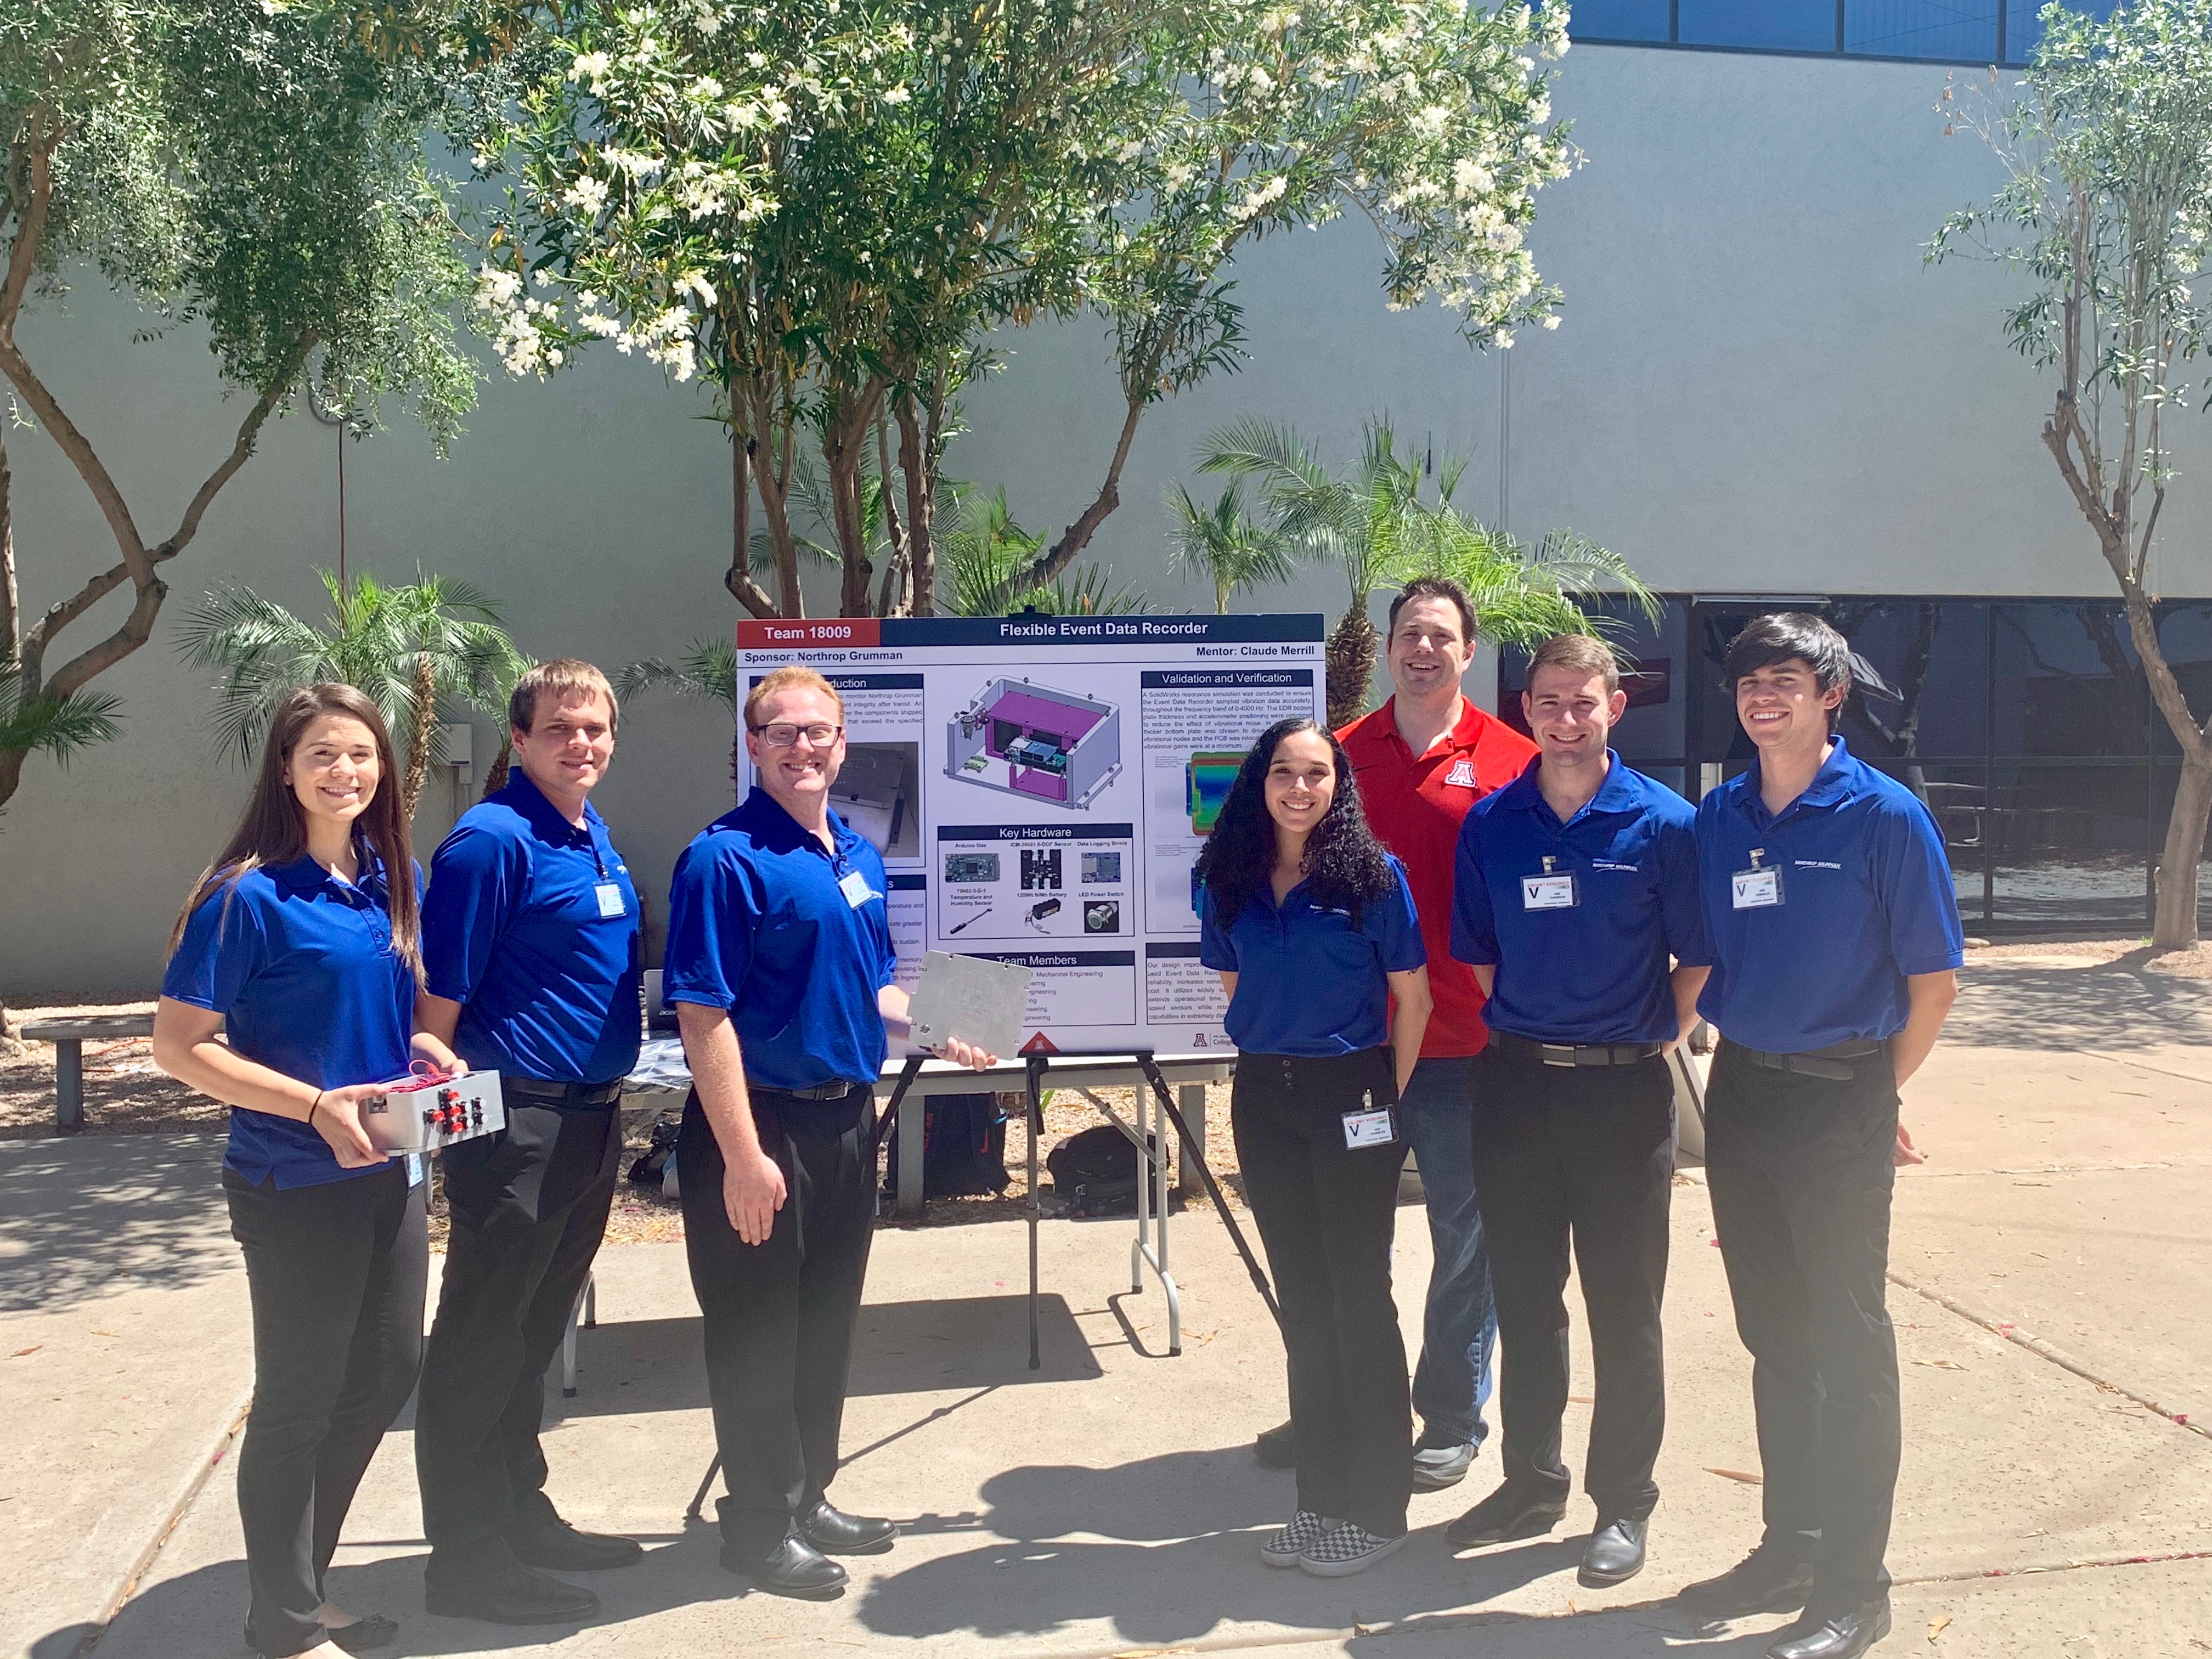 A group of seven people, six in blue polos and one in a red polo) stand next to an academic poster. They are outside and a tree is in the background.